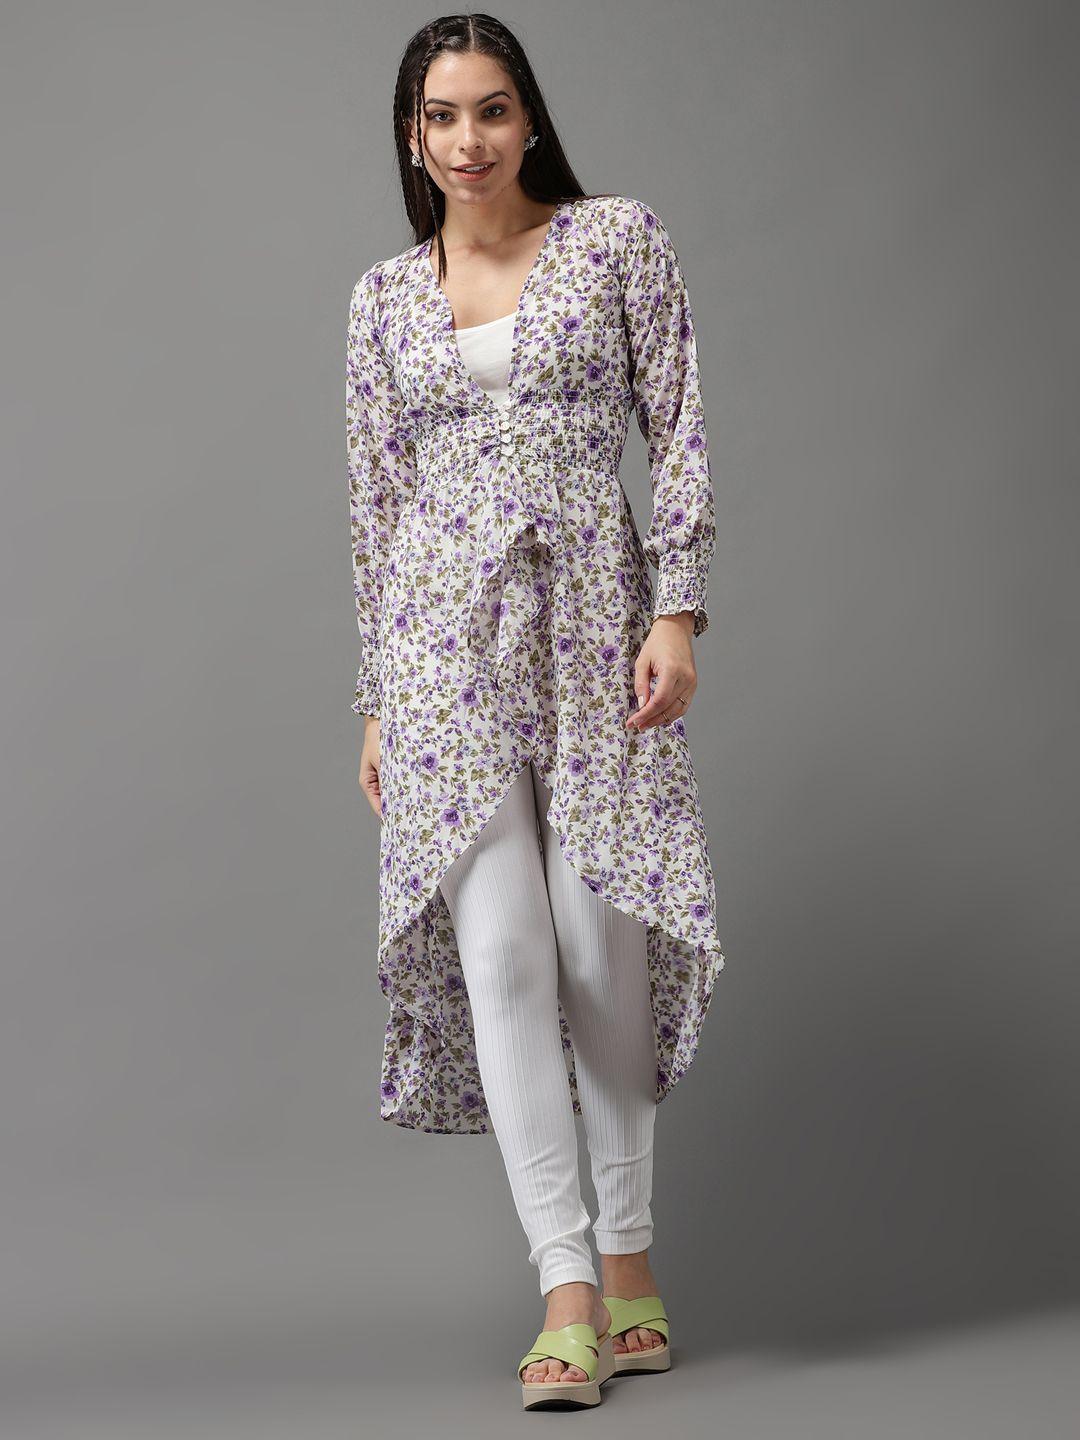 showoff white & purple floral print georgette high-low longline top